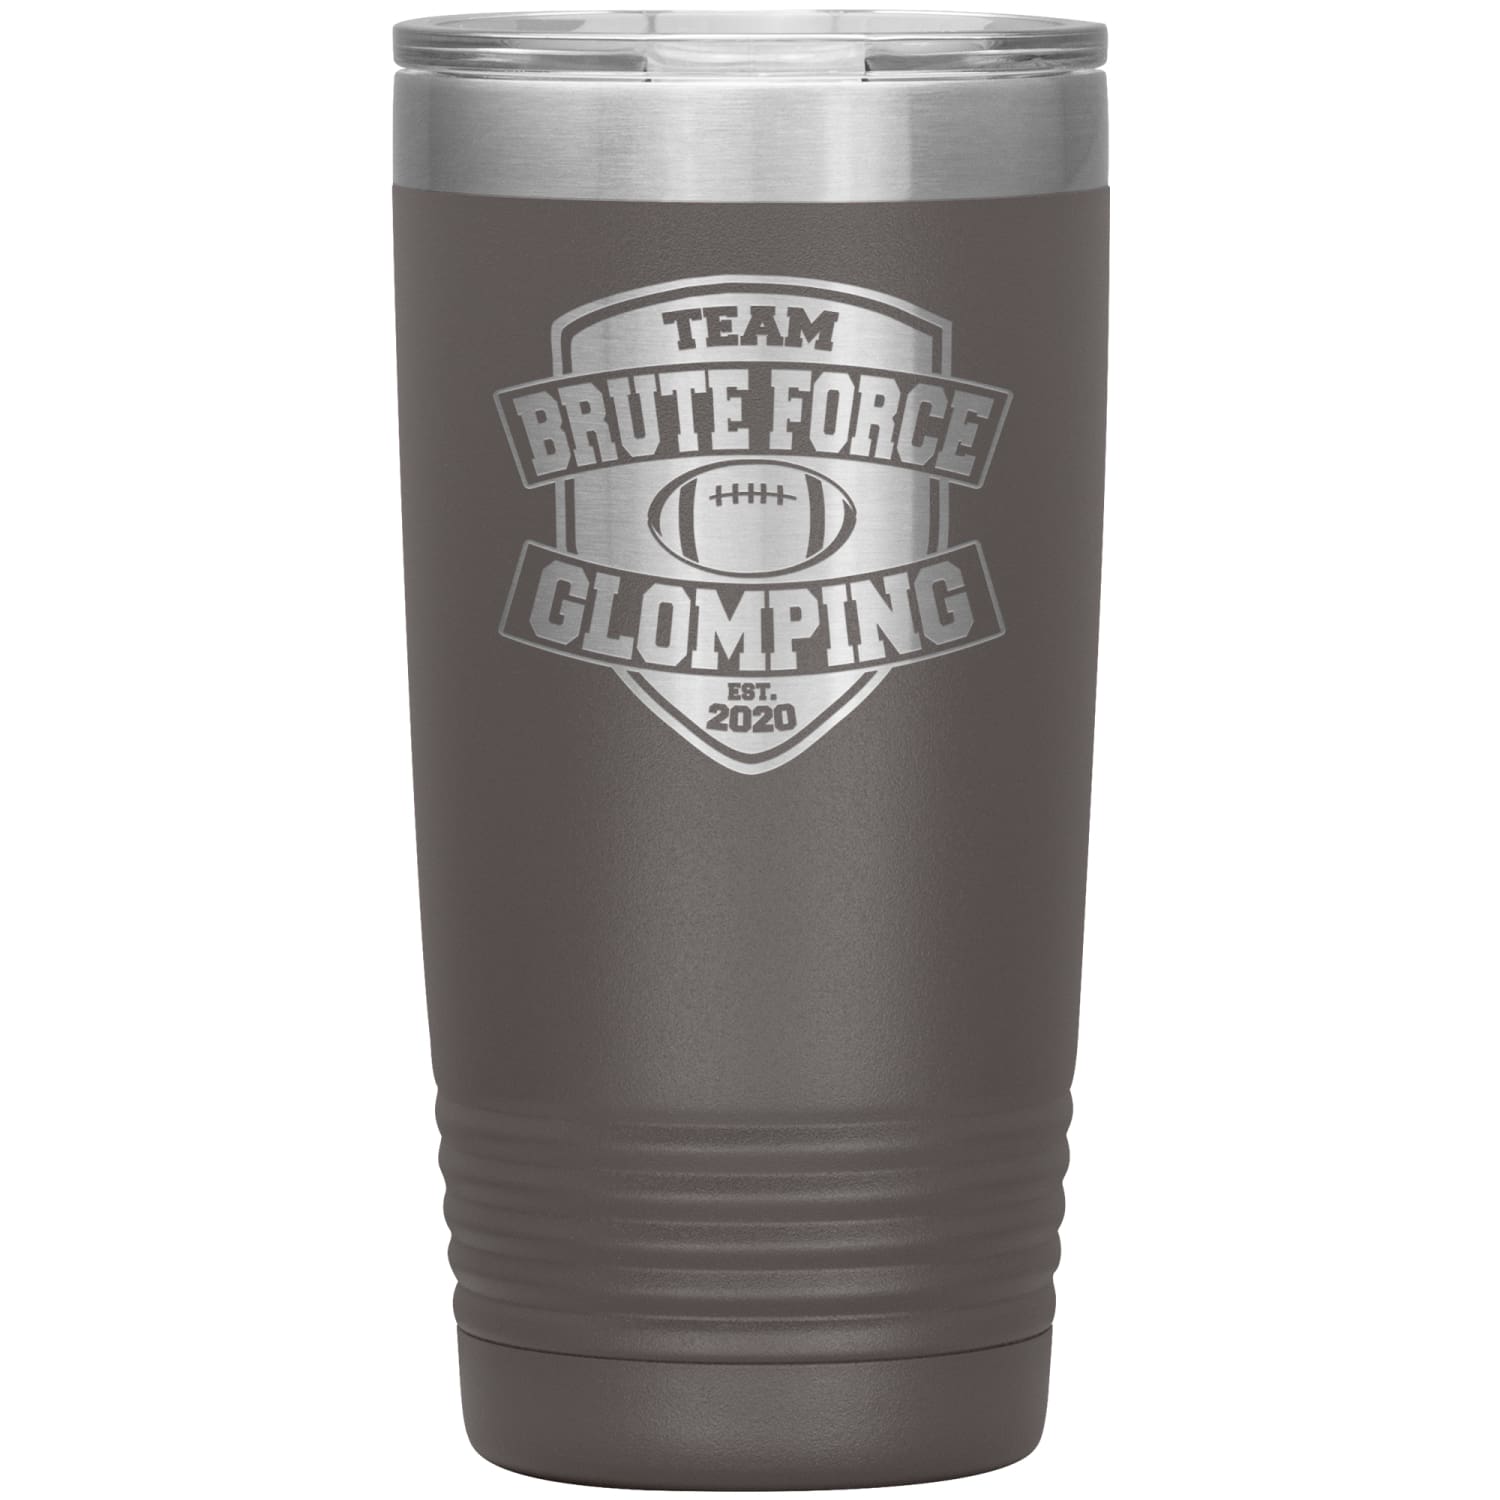 Chatty Fam Brute Force Glomping 20oz Vacuum Tumbler - Pewter - Tumblers